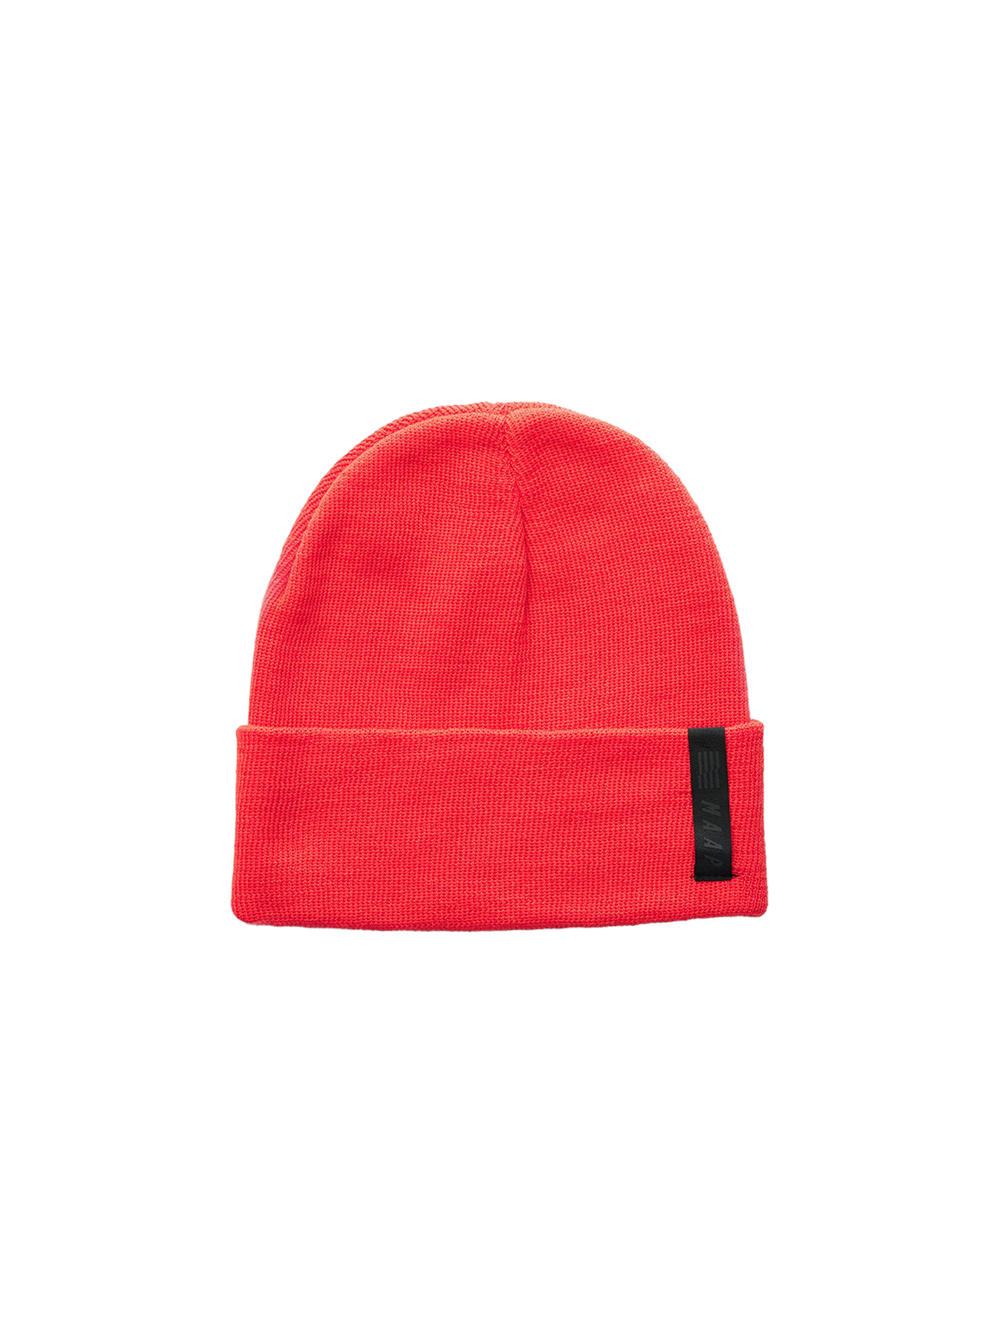 Product Image for Evade Beanie